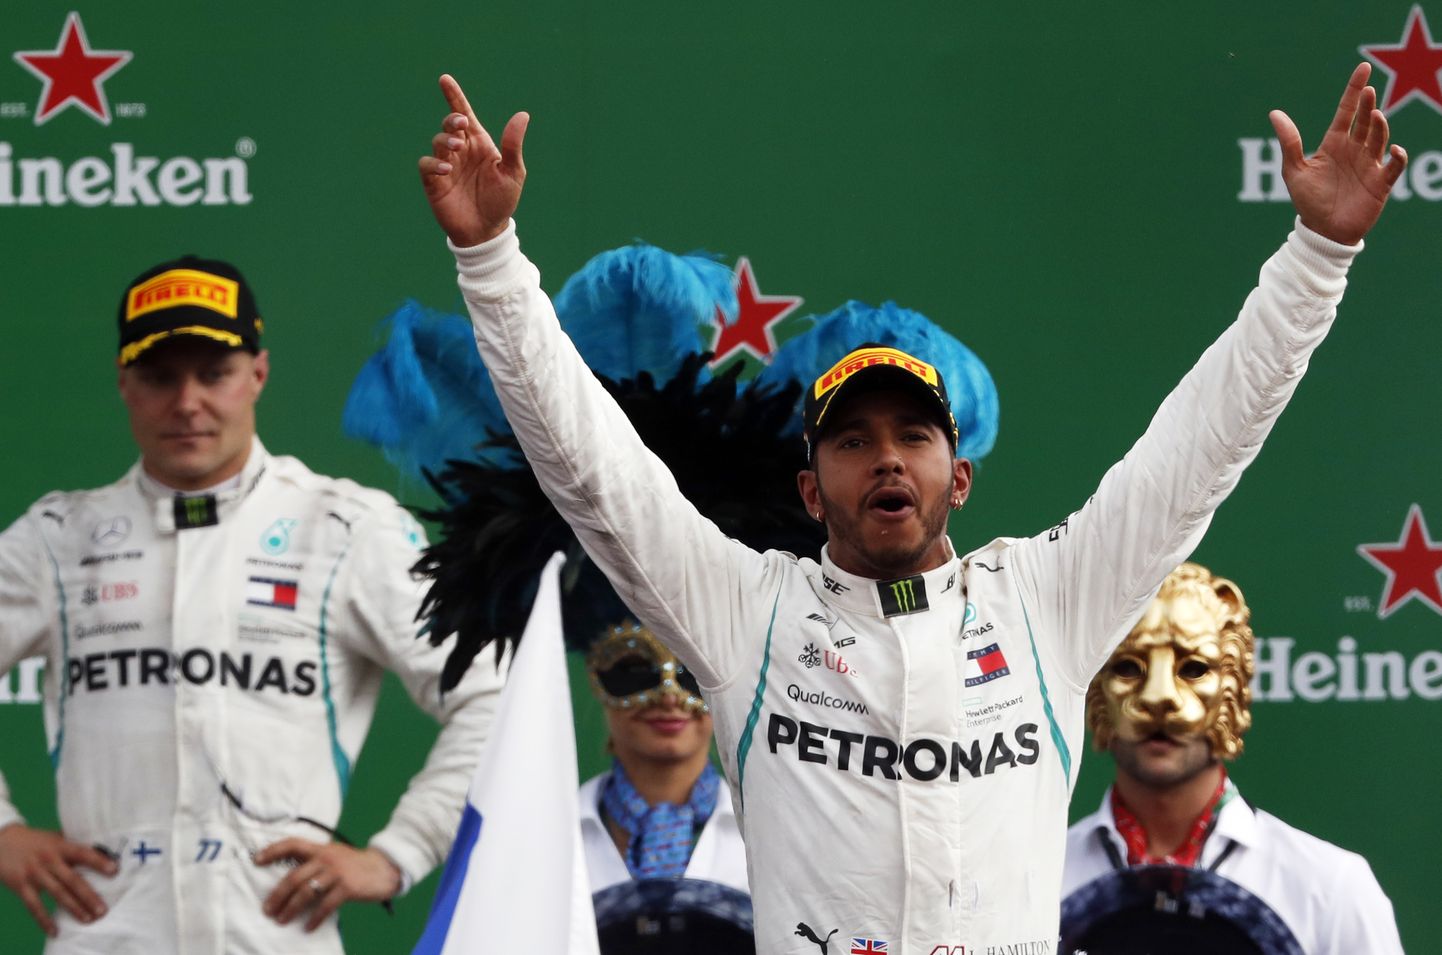 Mercedes driver Lewis Hamilton of Britain celebrates on the podium after winning the Formula One Italy Grand Prix at the Monza racetrack, in Monza, Italy, Sunday, Sept. 2, 2018. (AP Photo/Antonio Calanni)